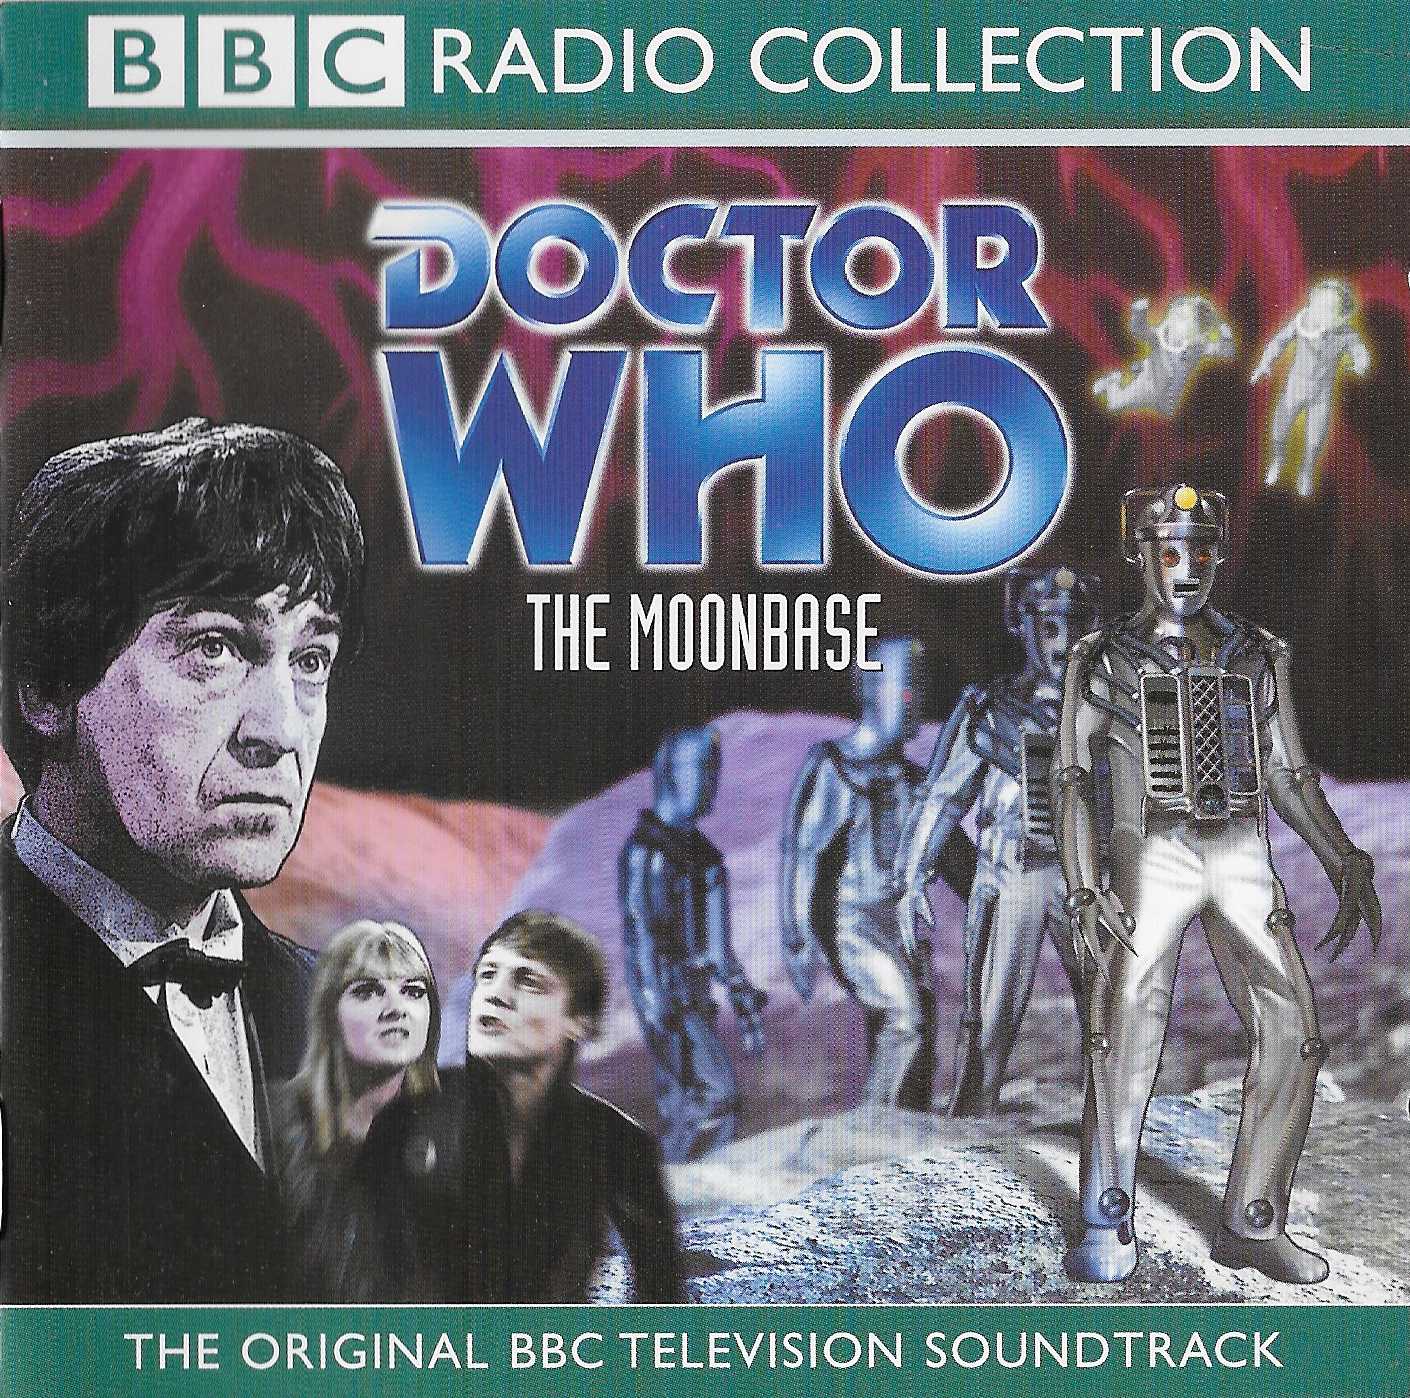 Picture of ISBN 0-563-47854-3 Doctor Who - The Moonbase by artist Kit Pedler from the BBC cds - Records and Tapes library